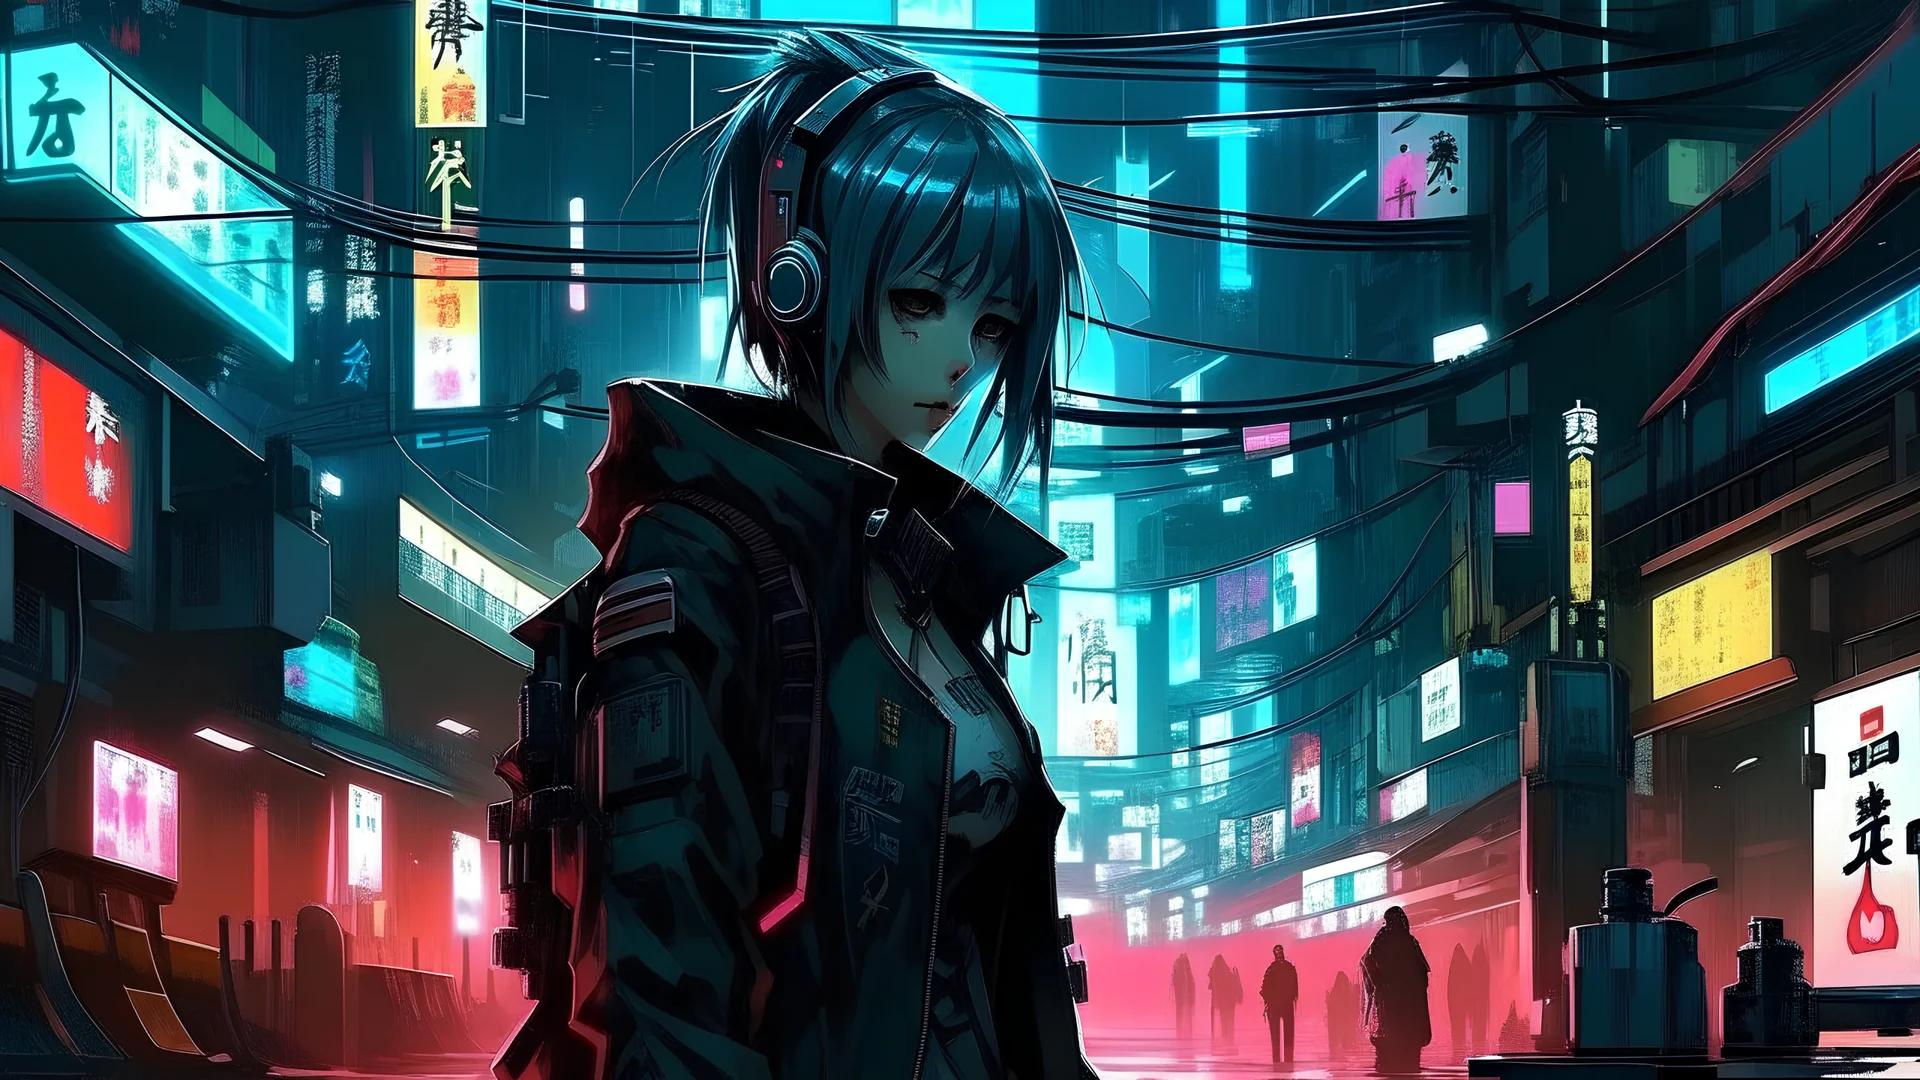 Custom I will create cyberpunk anime style illustration for you Art  Commission | Sketchmob